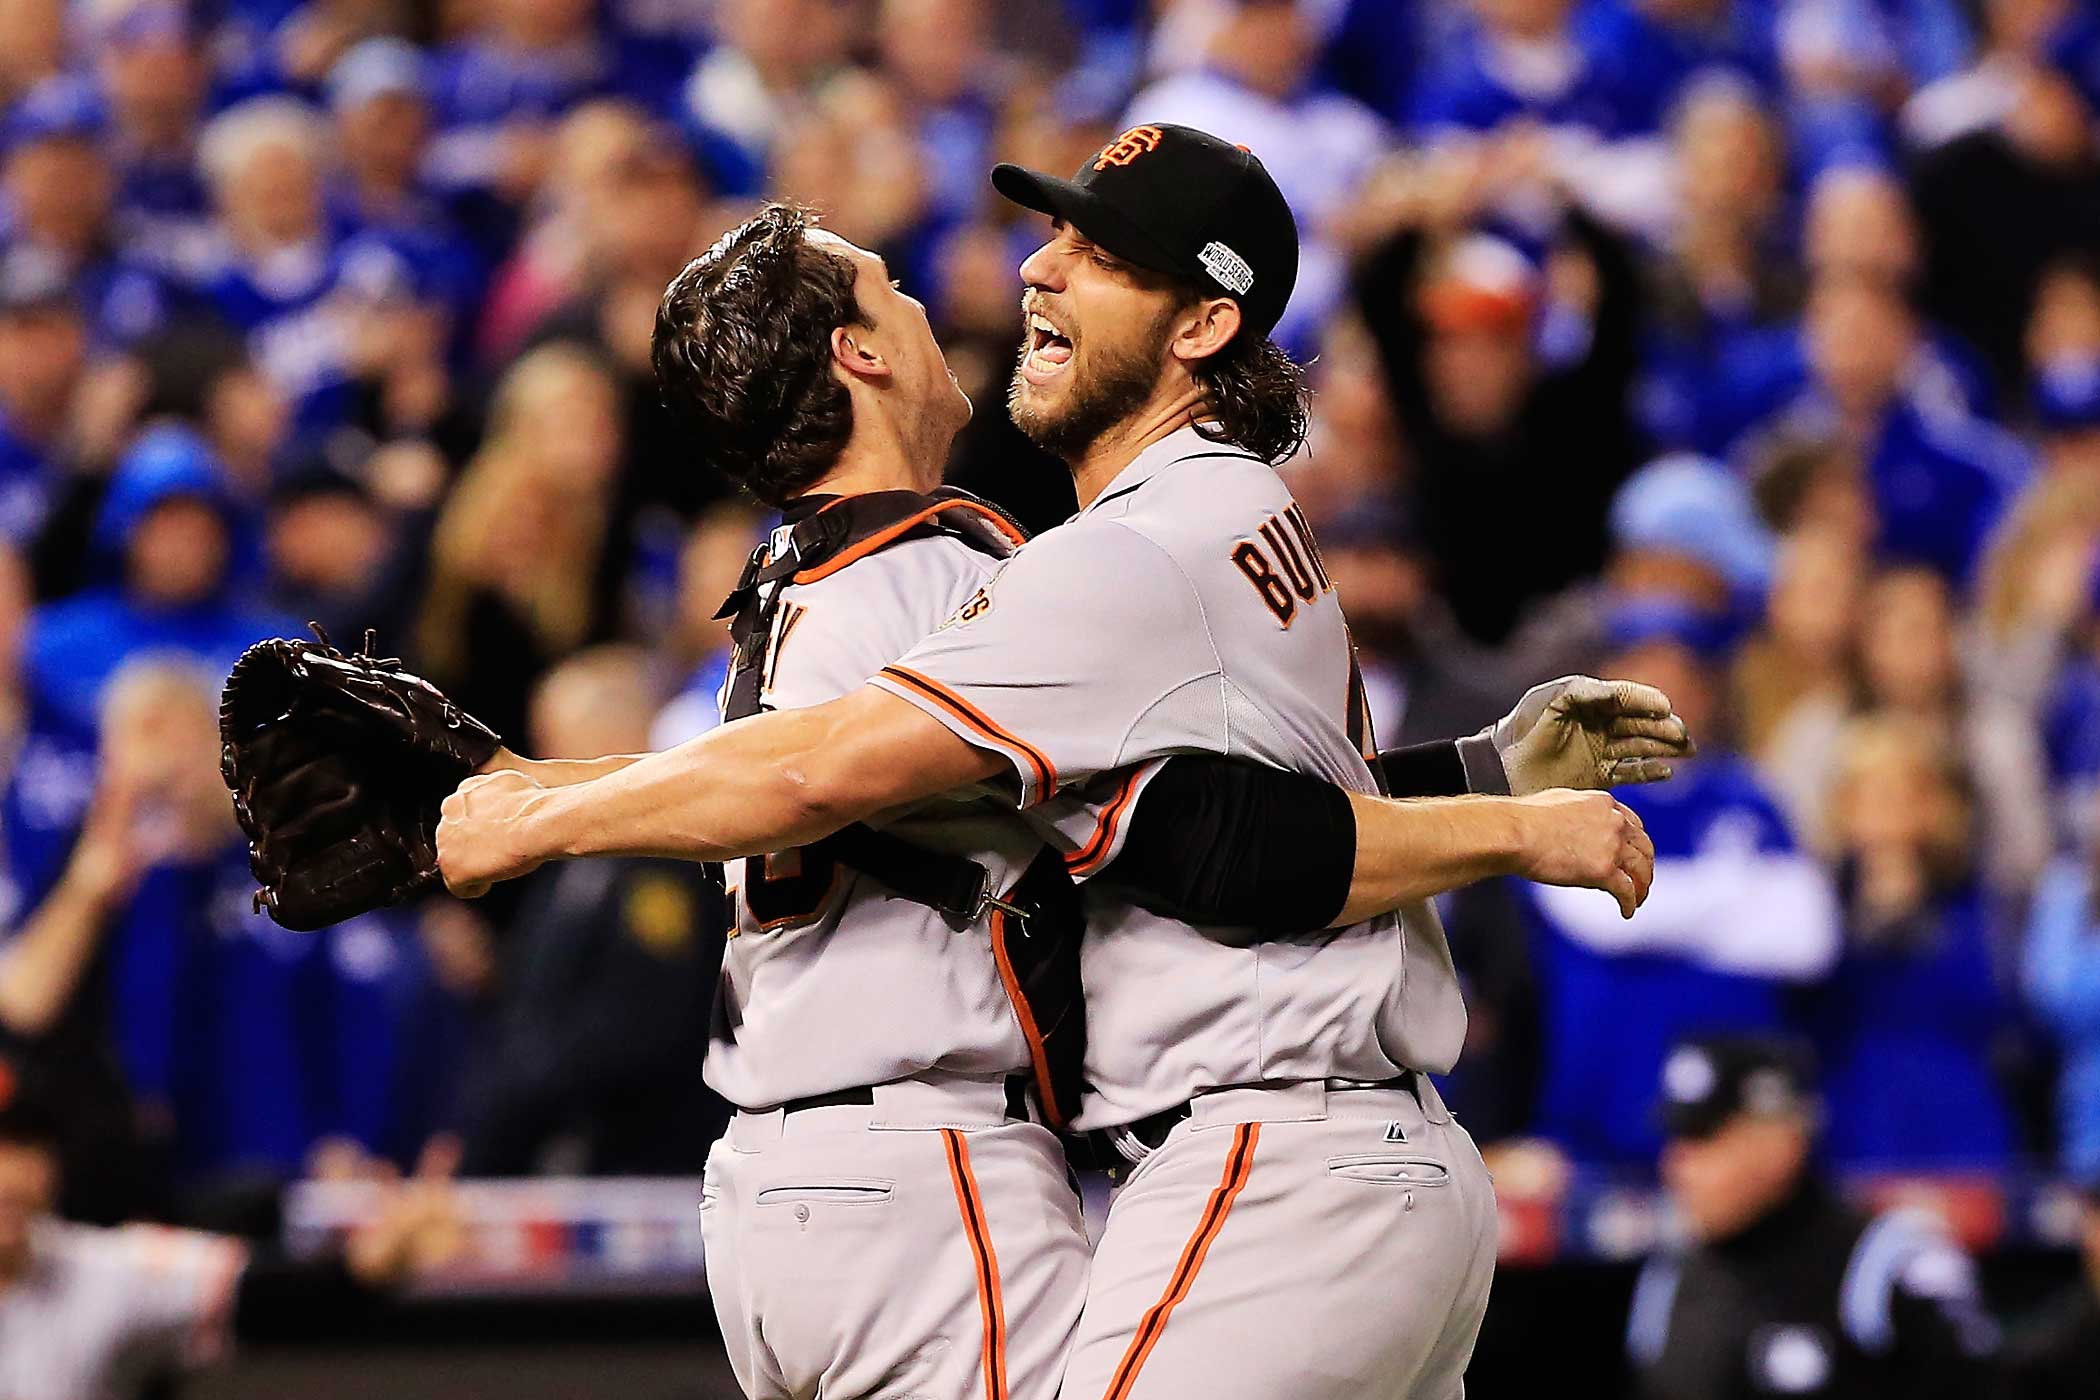 Buster Posey and Madison Bumgarner of the San Francisco Giants celebrate after defeating the Kansas City Royals to win Game Seven of the 2014 World Series by a score of 3-2 at Kauffman Stadium on October 29, 2014 in Kansas City, Missouri. (Jamie Squire—Getty Images)